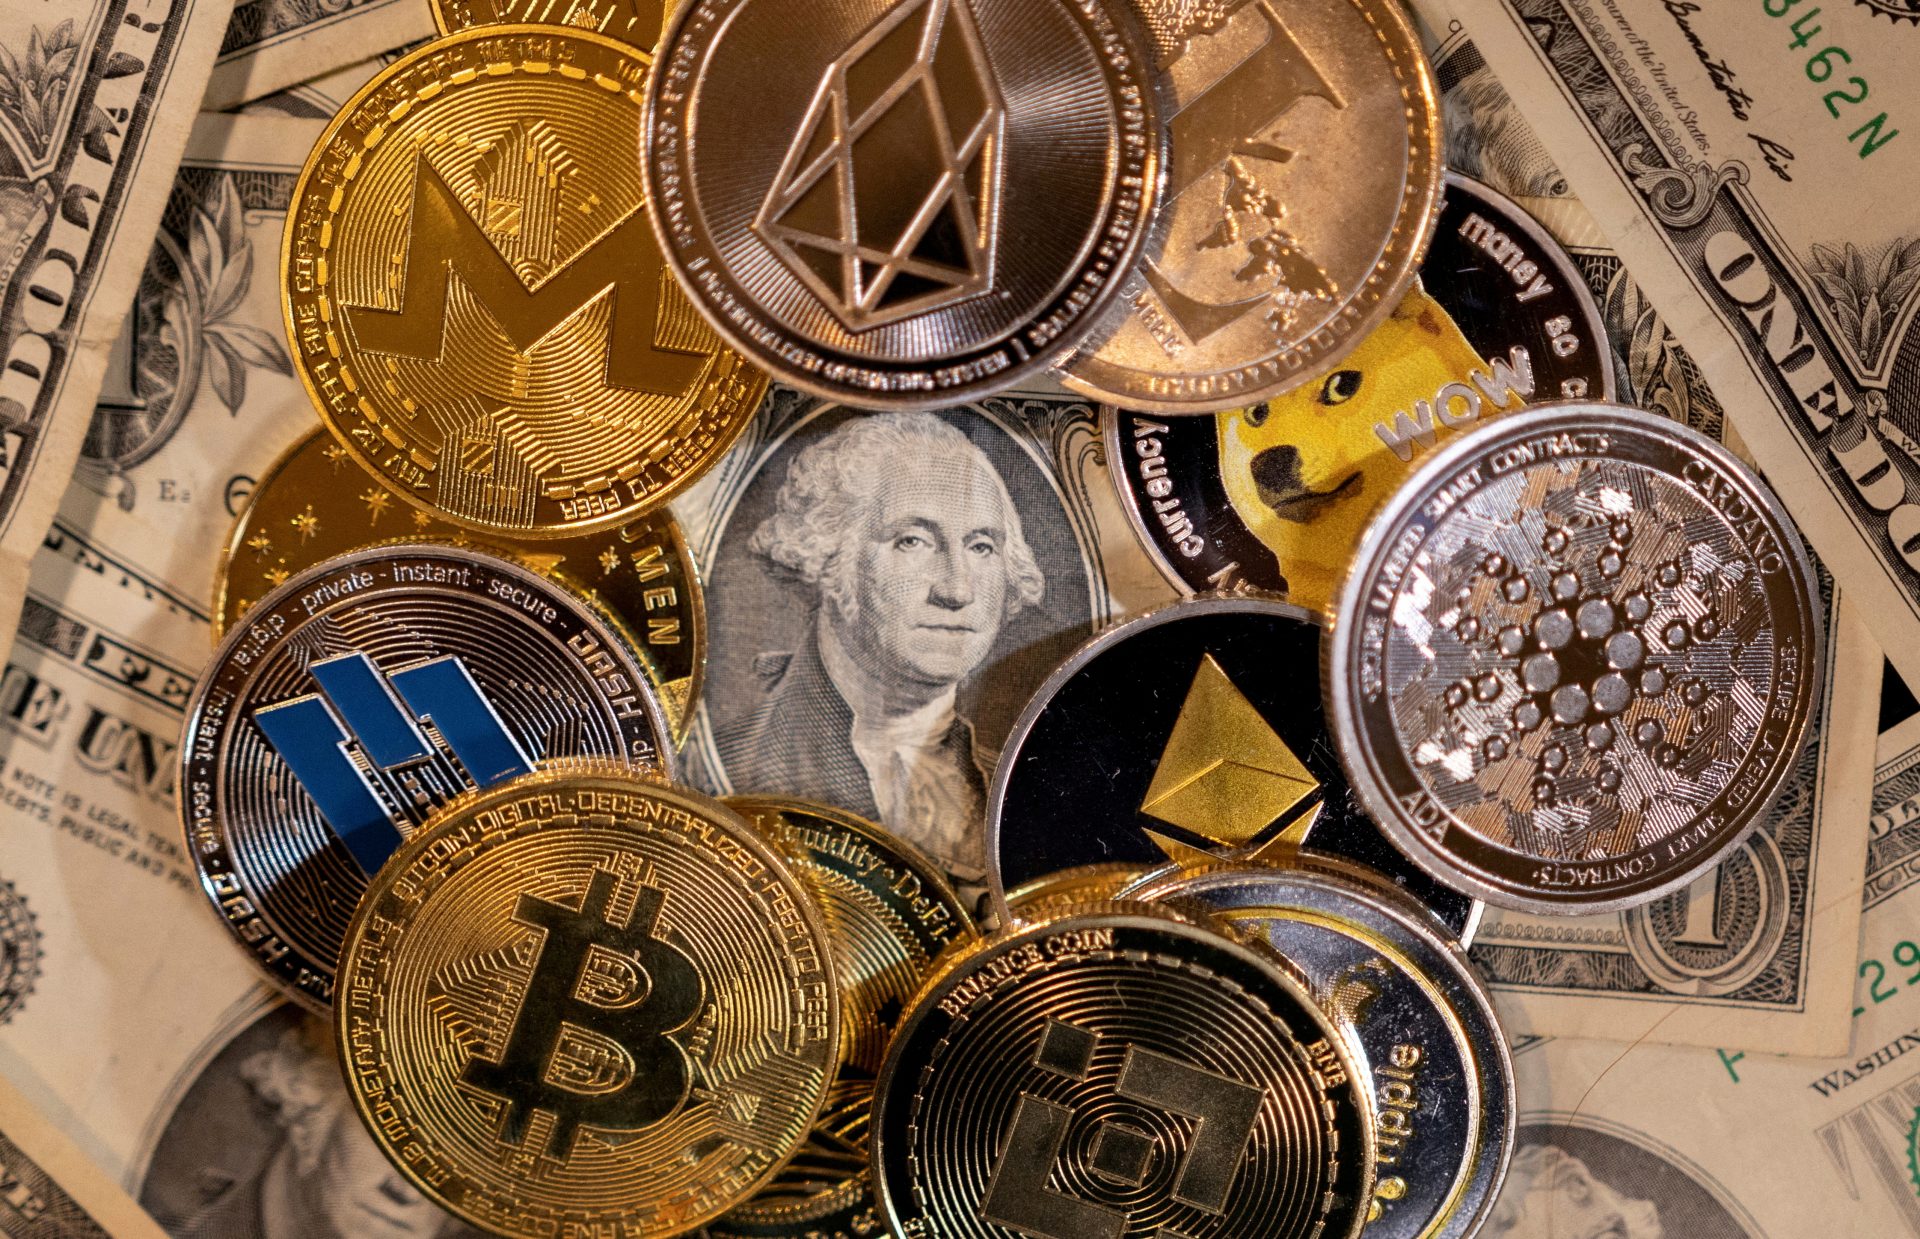 Bitcoin and Other Digital Currencies in the Future